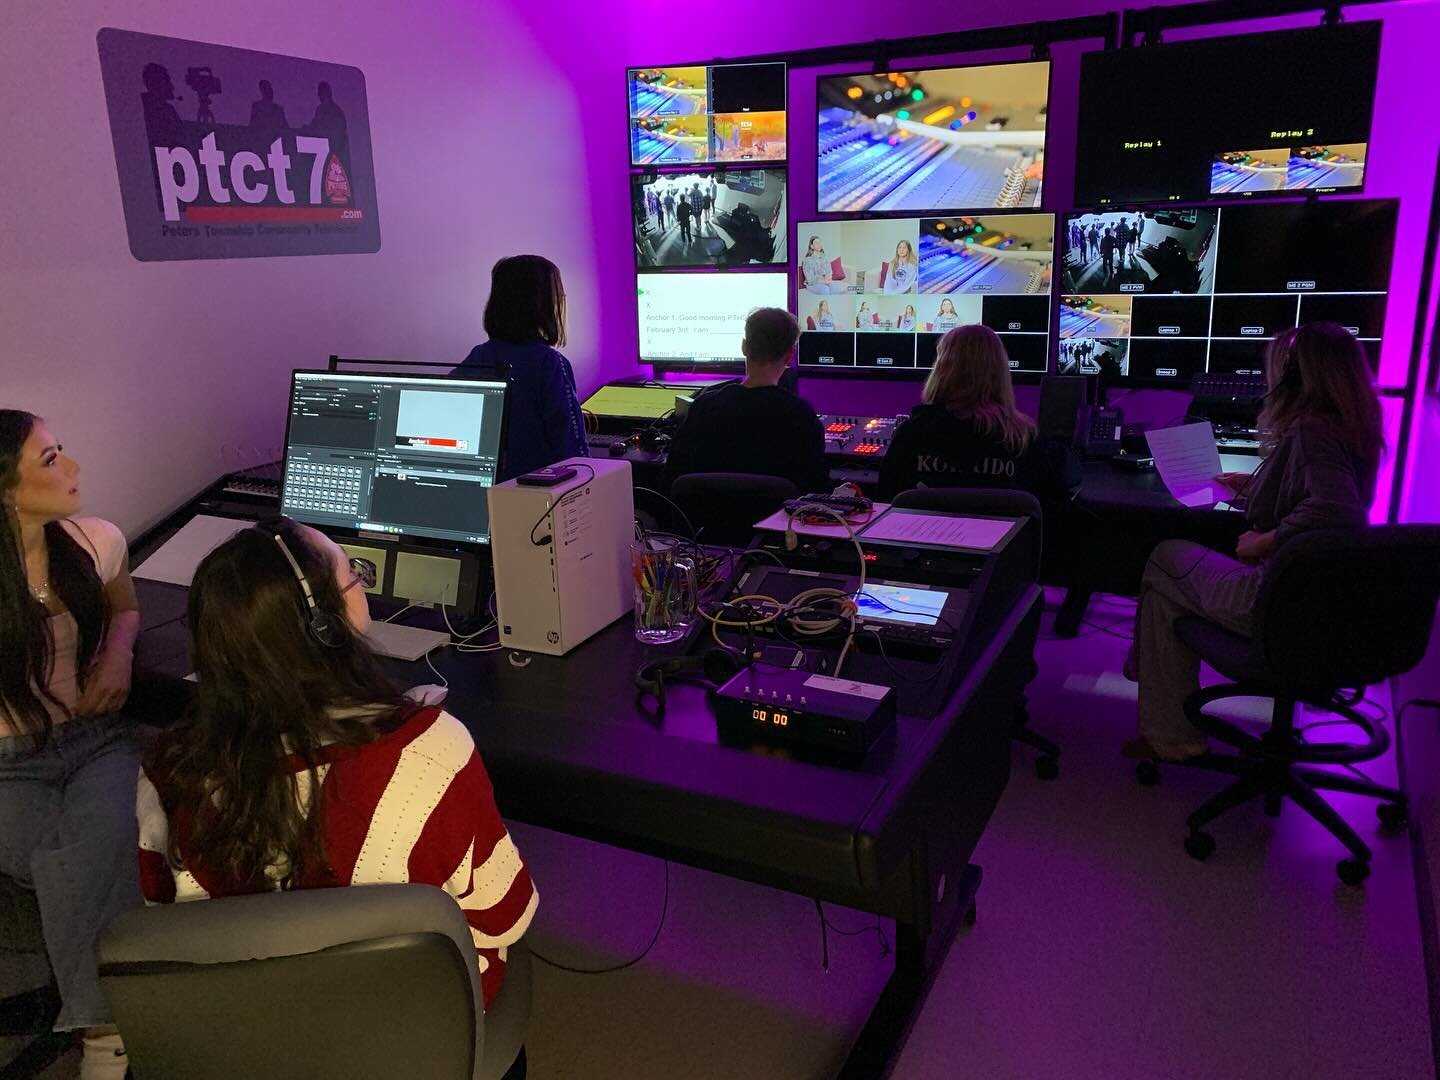 Media Broadcast students introduced the Media I students to the control room and studio the past several days.  Current and future volunteers working together! #ptct7